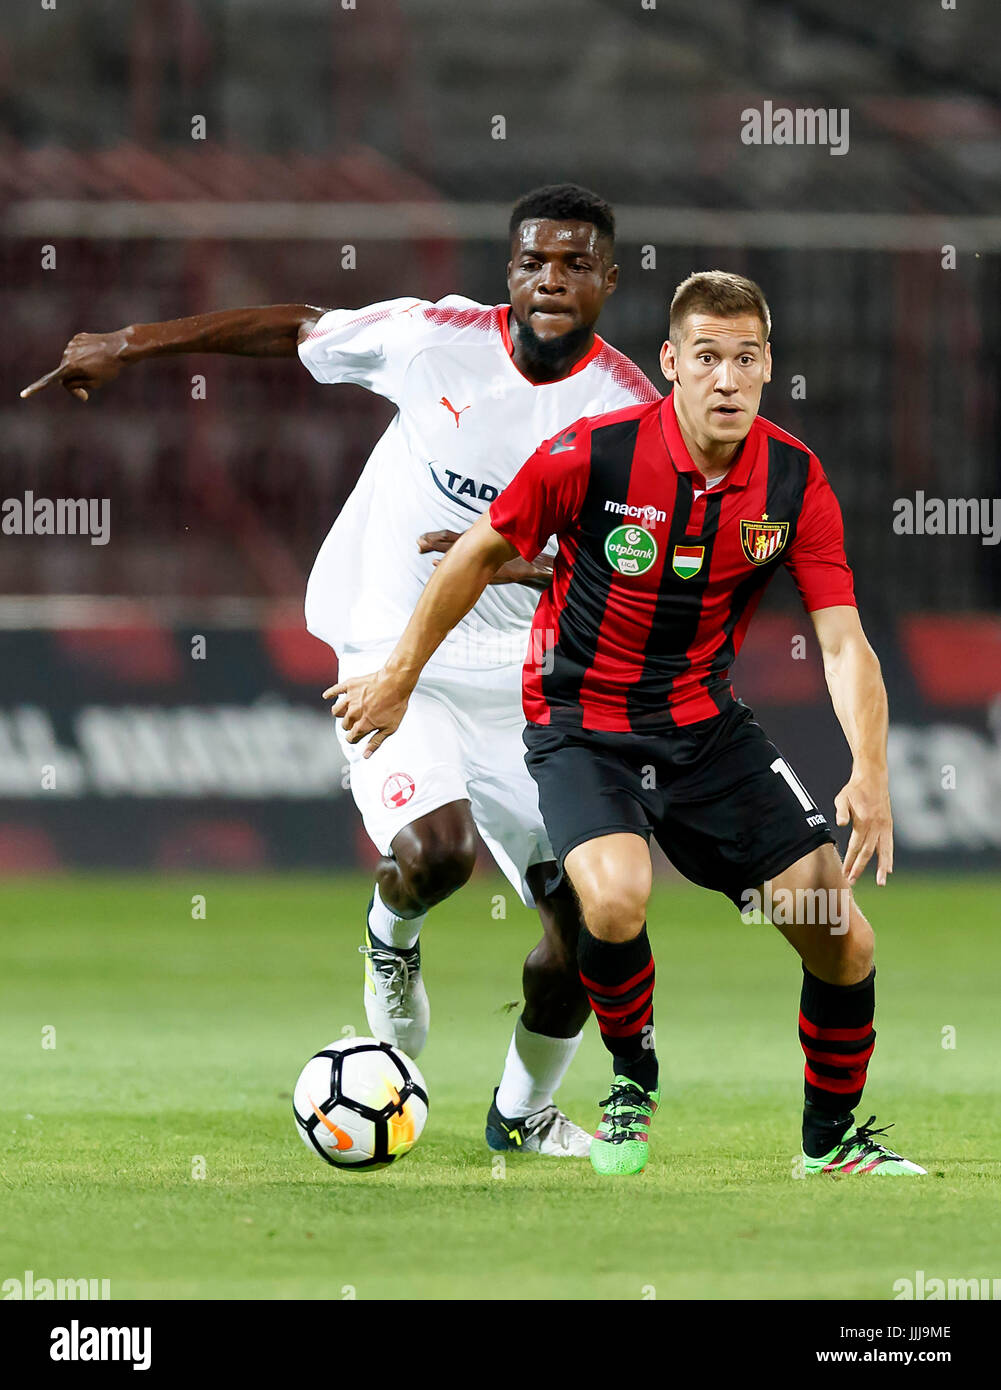 Budapest, Hungary. 19th July, 2017. BUDAPEST, HUNGARY - JULY 19: Zsolt Poloskei (R) of Budapest Honved competes for the ball with John Ogu (L) of Hapoel Beer-Sheva during the UEFA Champions League Second Qualifying Round match between Budapest Honved and Hapoel Beer-Sheva at Bozsik Stadium on July 19, 2017 in Budapest, Hungary. Credit: Laszlo Szirtesi/Alamy Live News Stock Photo